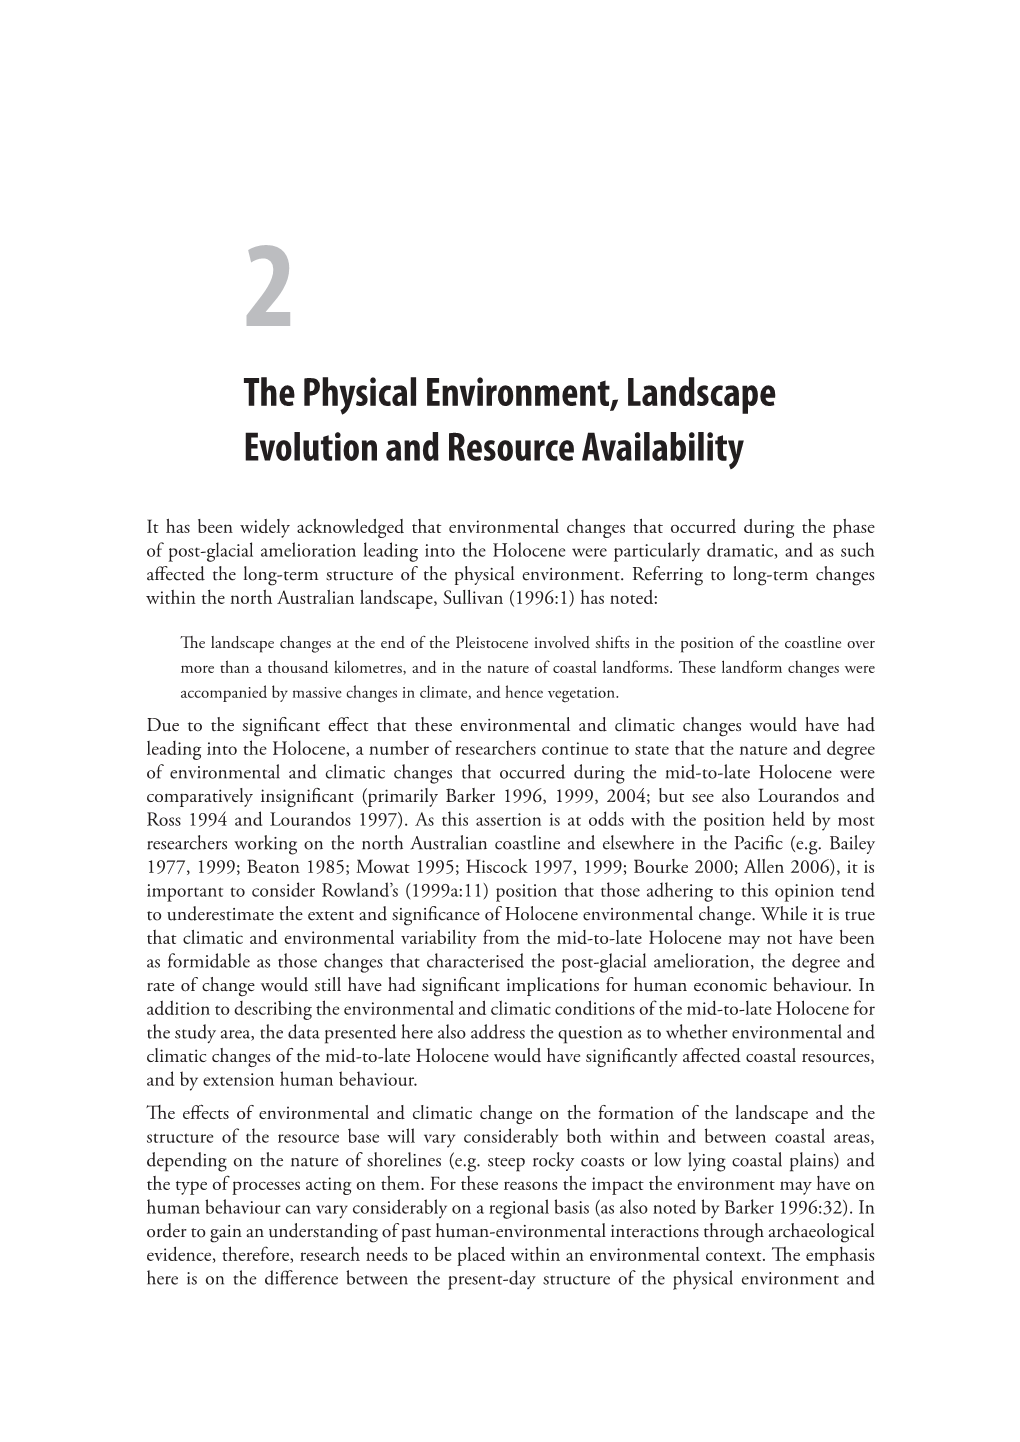 The Physical Environment, Landscape Evolution and Resource Availability